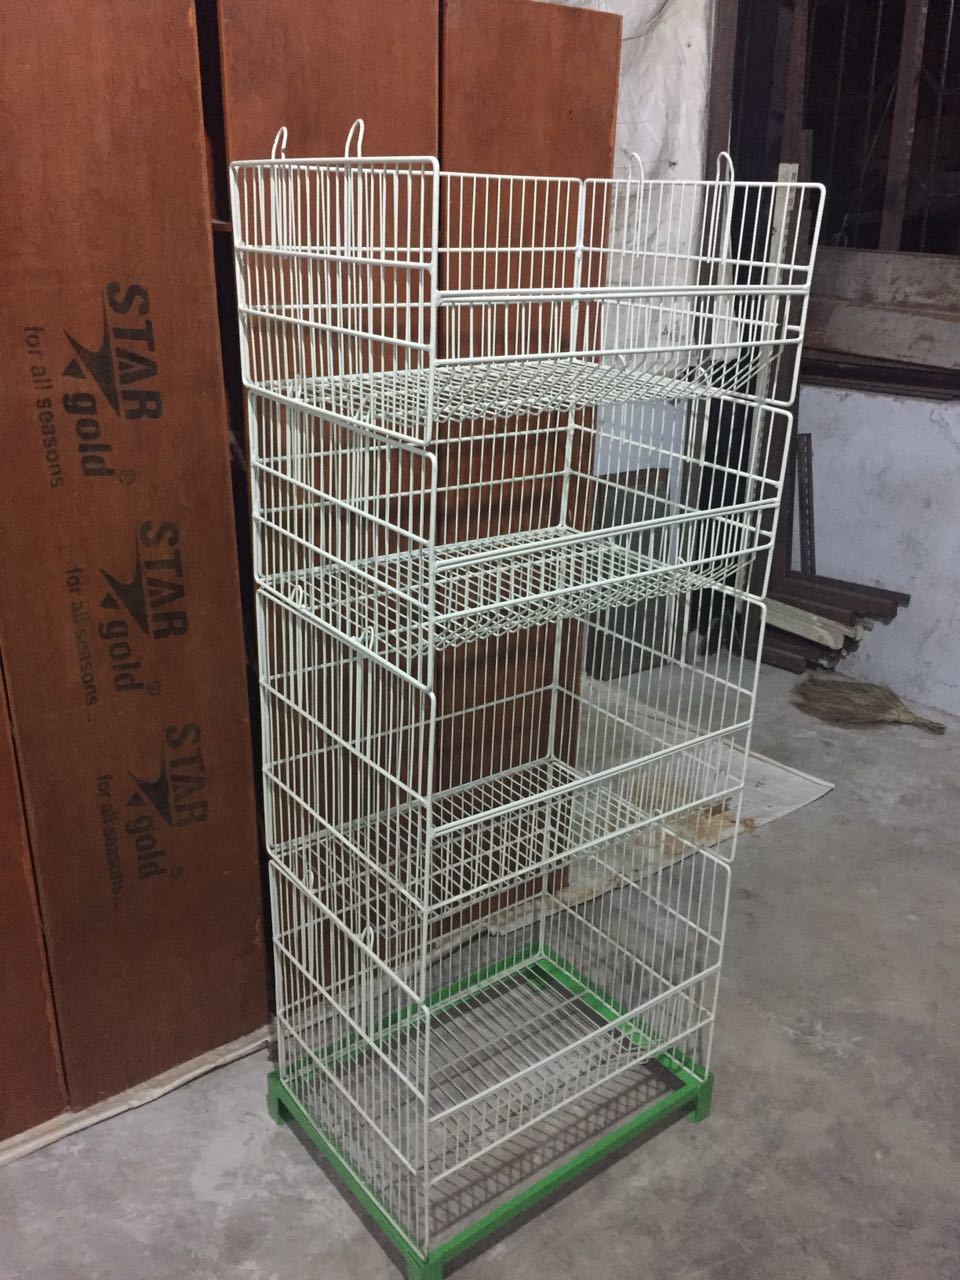 Display Wire Racks at Lowest Price in Vasai Manufacturer,Supplier,Maharashtra,India